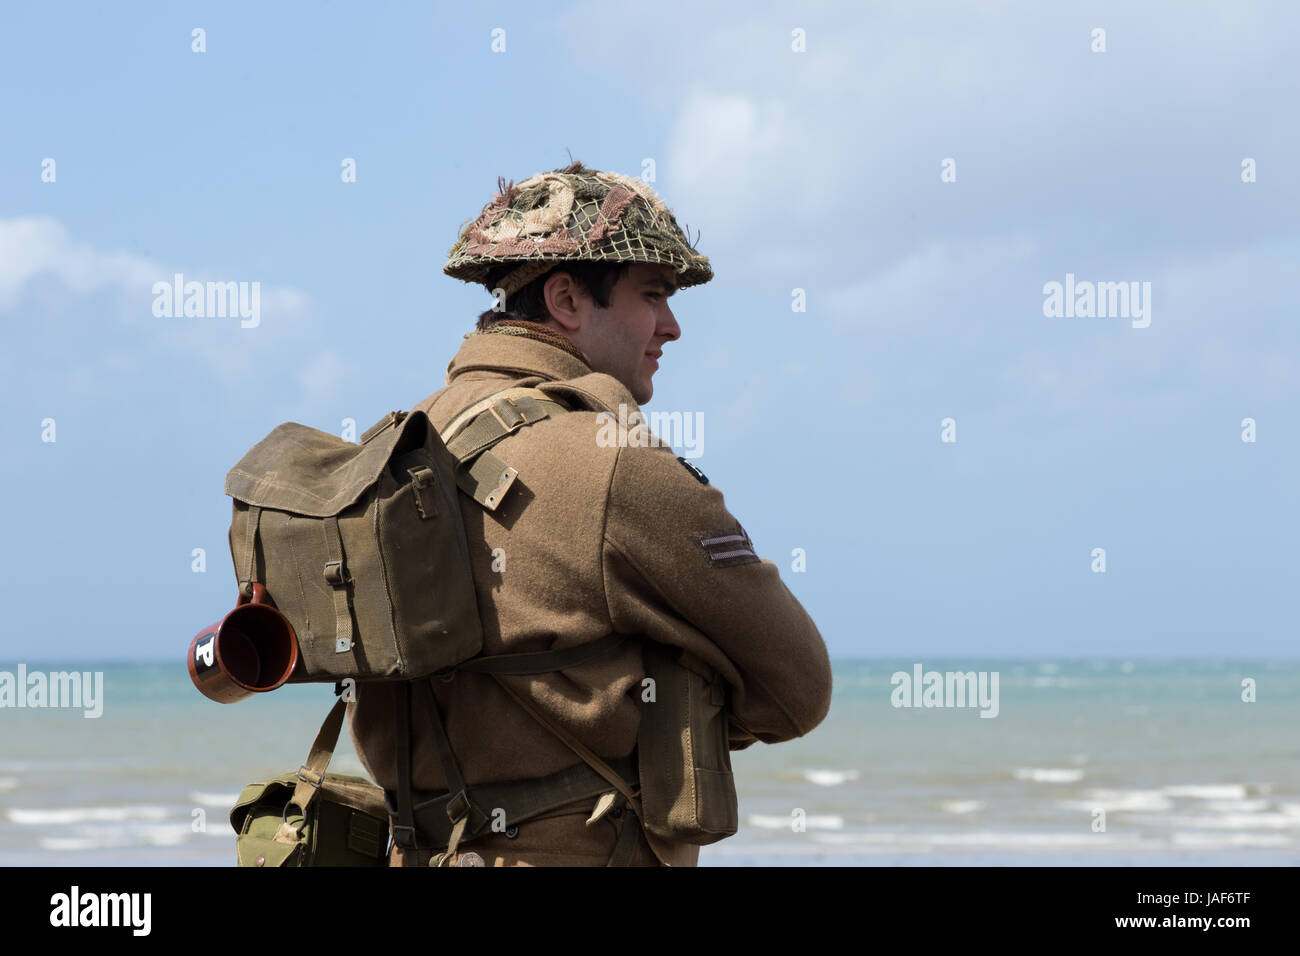 Normandy, France. 6th June 2017, Arromanches-les-Bains. The British Gold beach sector of the Normandy landings is full of visitors who gather for one of the popular commemorations of the 6th June D-Day schedule. Dozens of veterans attend a service despite gale force winds and persistent showers. The town which is home to the Mulberry Harbour is alive with period costume, vintage vehicles and a celebratory atmosphere. Credit: Wayne Farrell/Alamy News Stock Photo